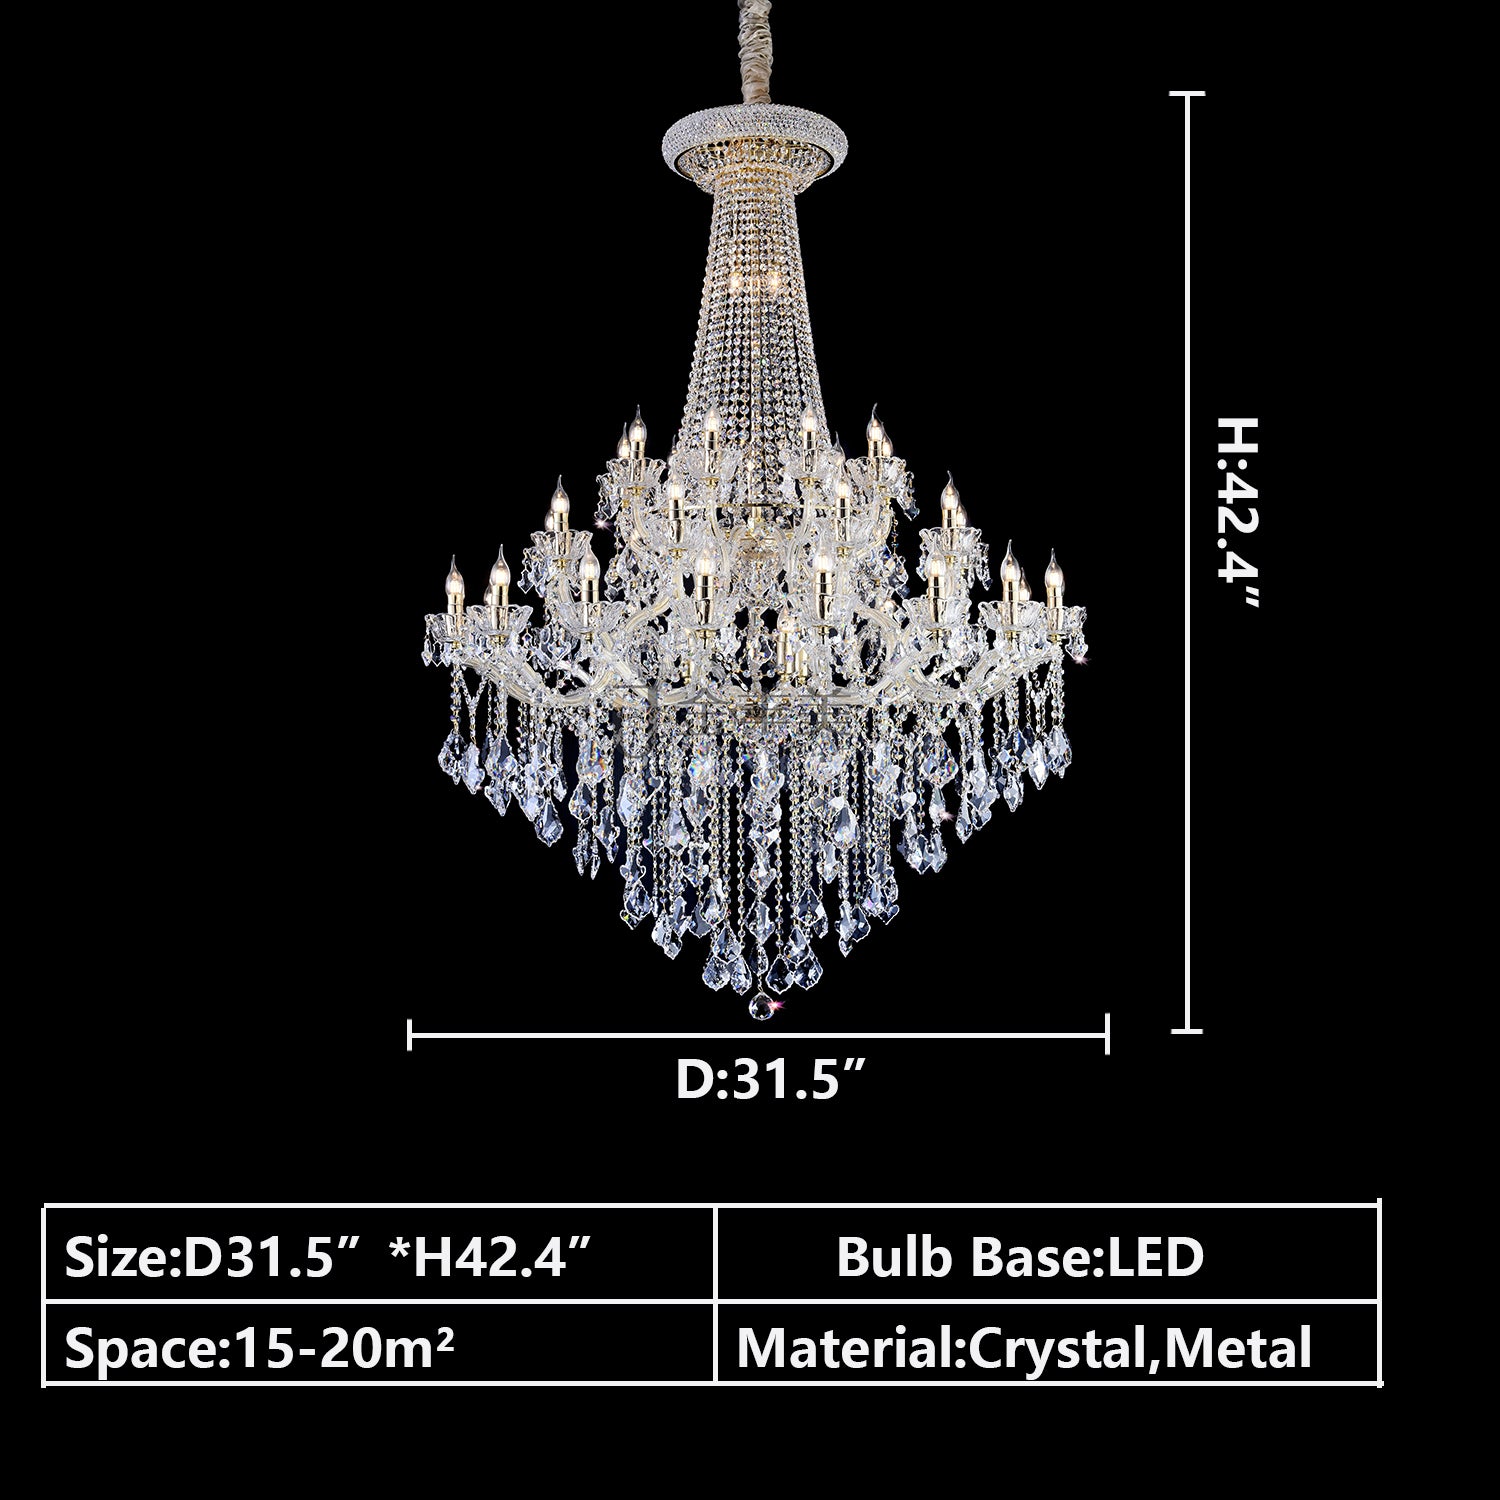 D31.5*H42.4" chandelier,chandeliers,pendant,crystal,metal,clear crystal,candle,branch,round,raindrop,teardrop,extra large,oversized,large,huge,big,round,living room,luxury,dining room,modern,foyer,stairs,hallway,entrys,hotel lobby,duplex hall,loft